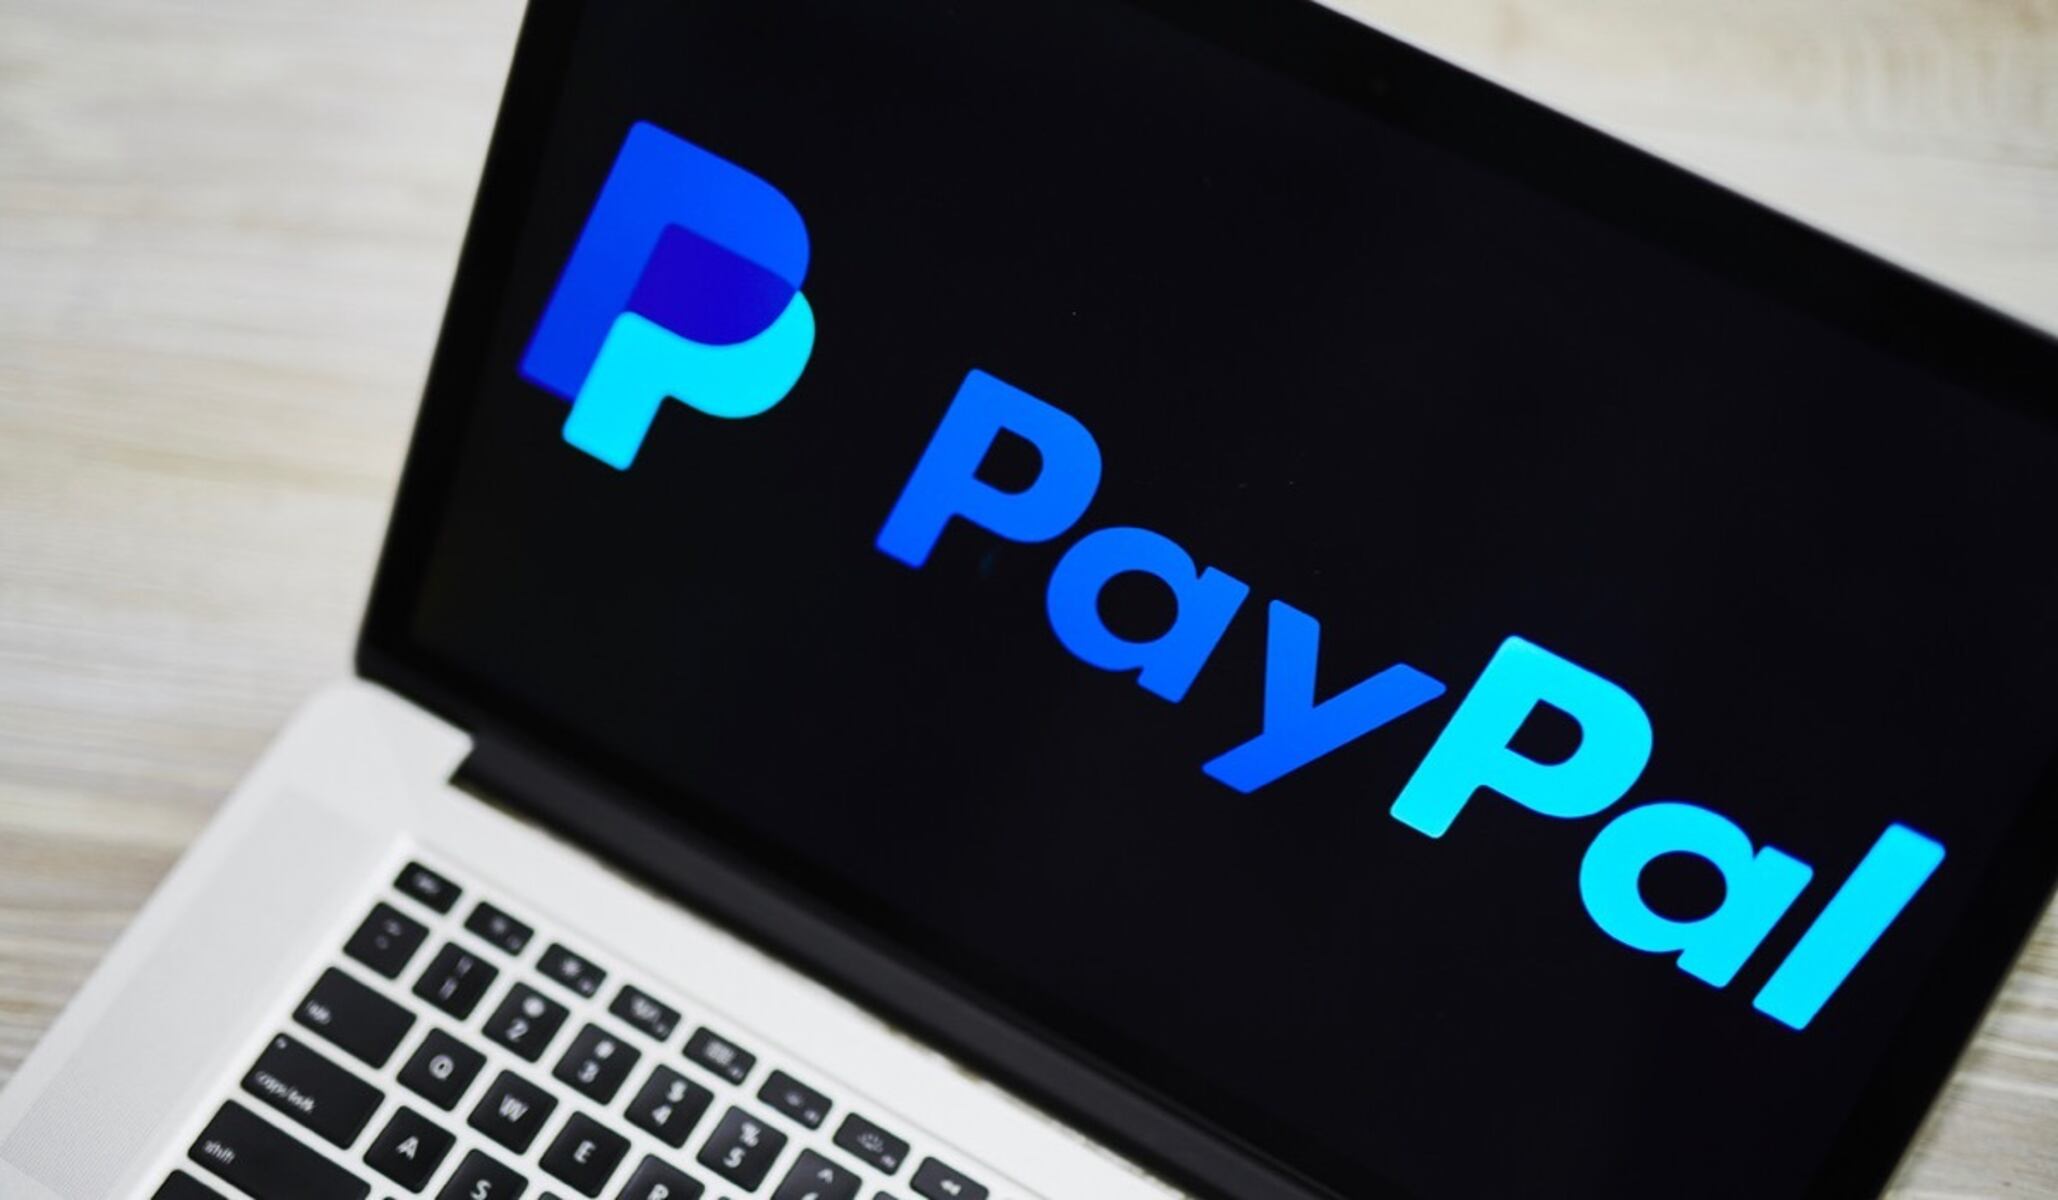 What Is The Fee For An International Paypal Money Transfer